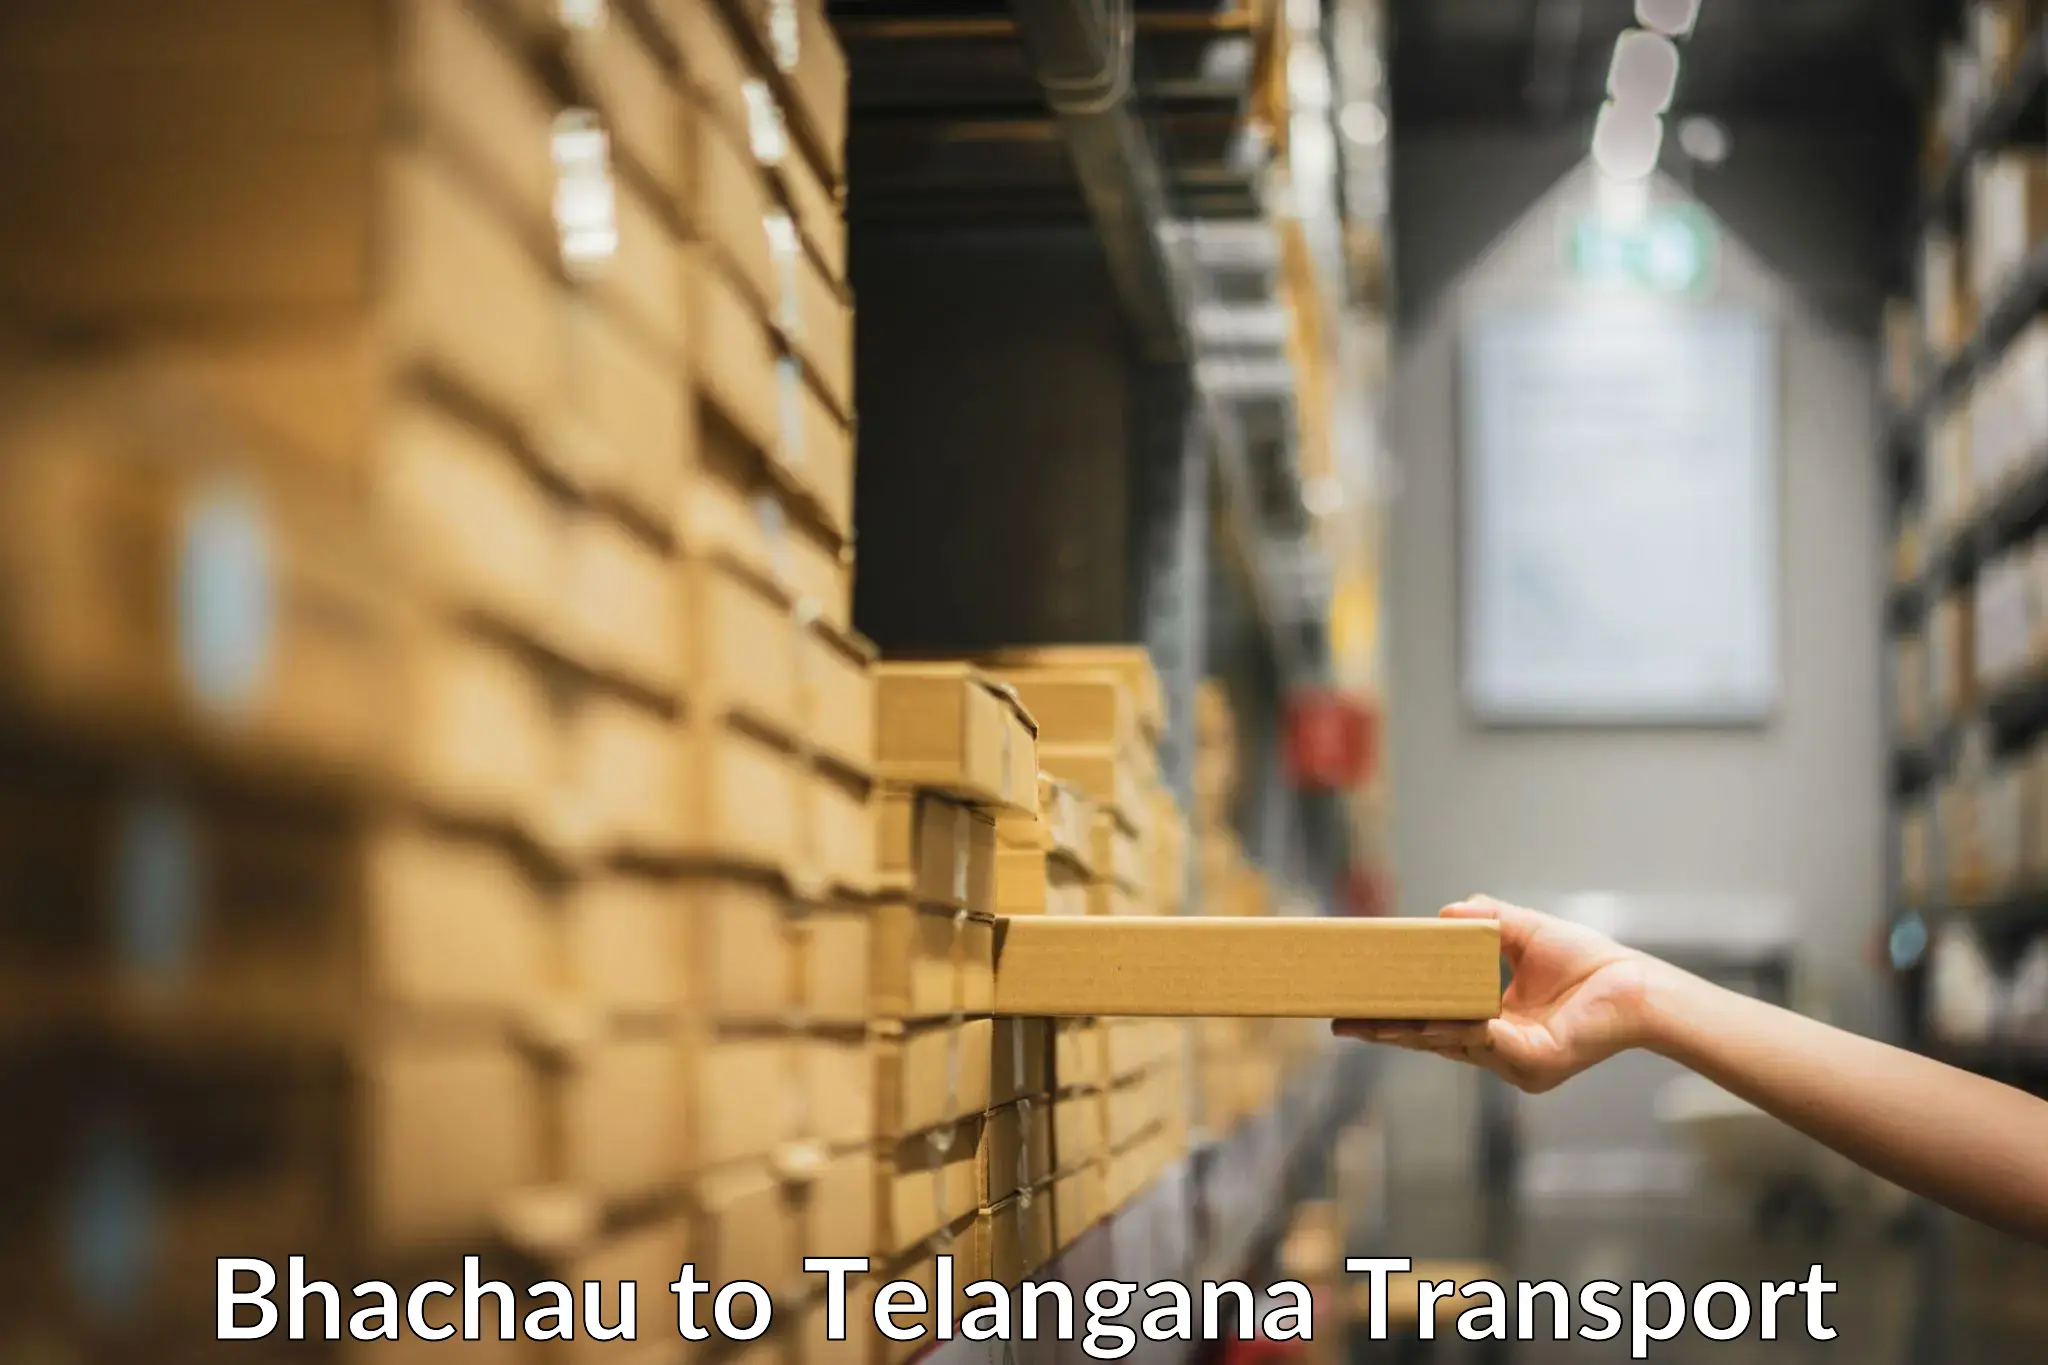 Truck transport companies in India Bhachau to Odela